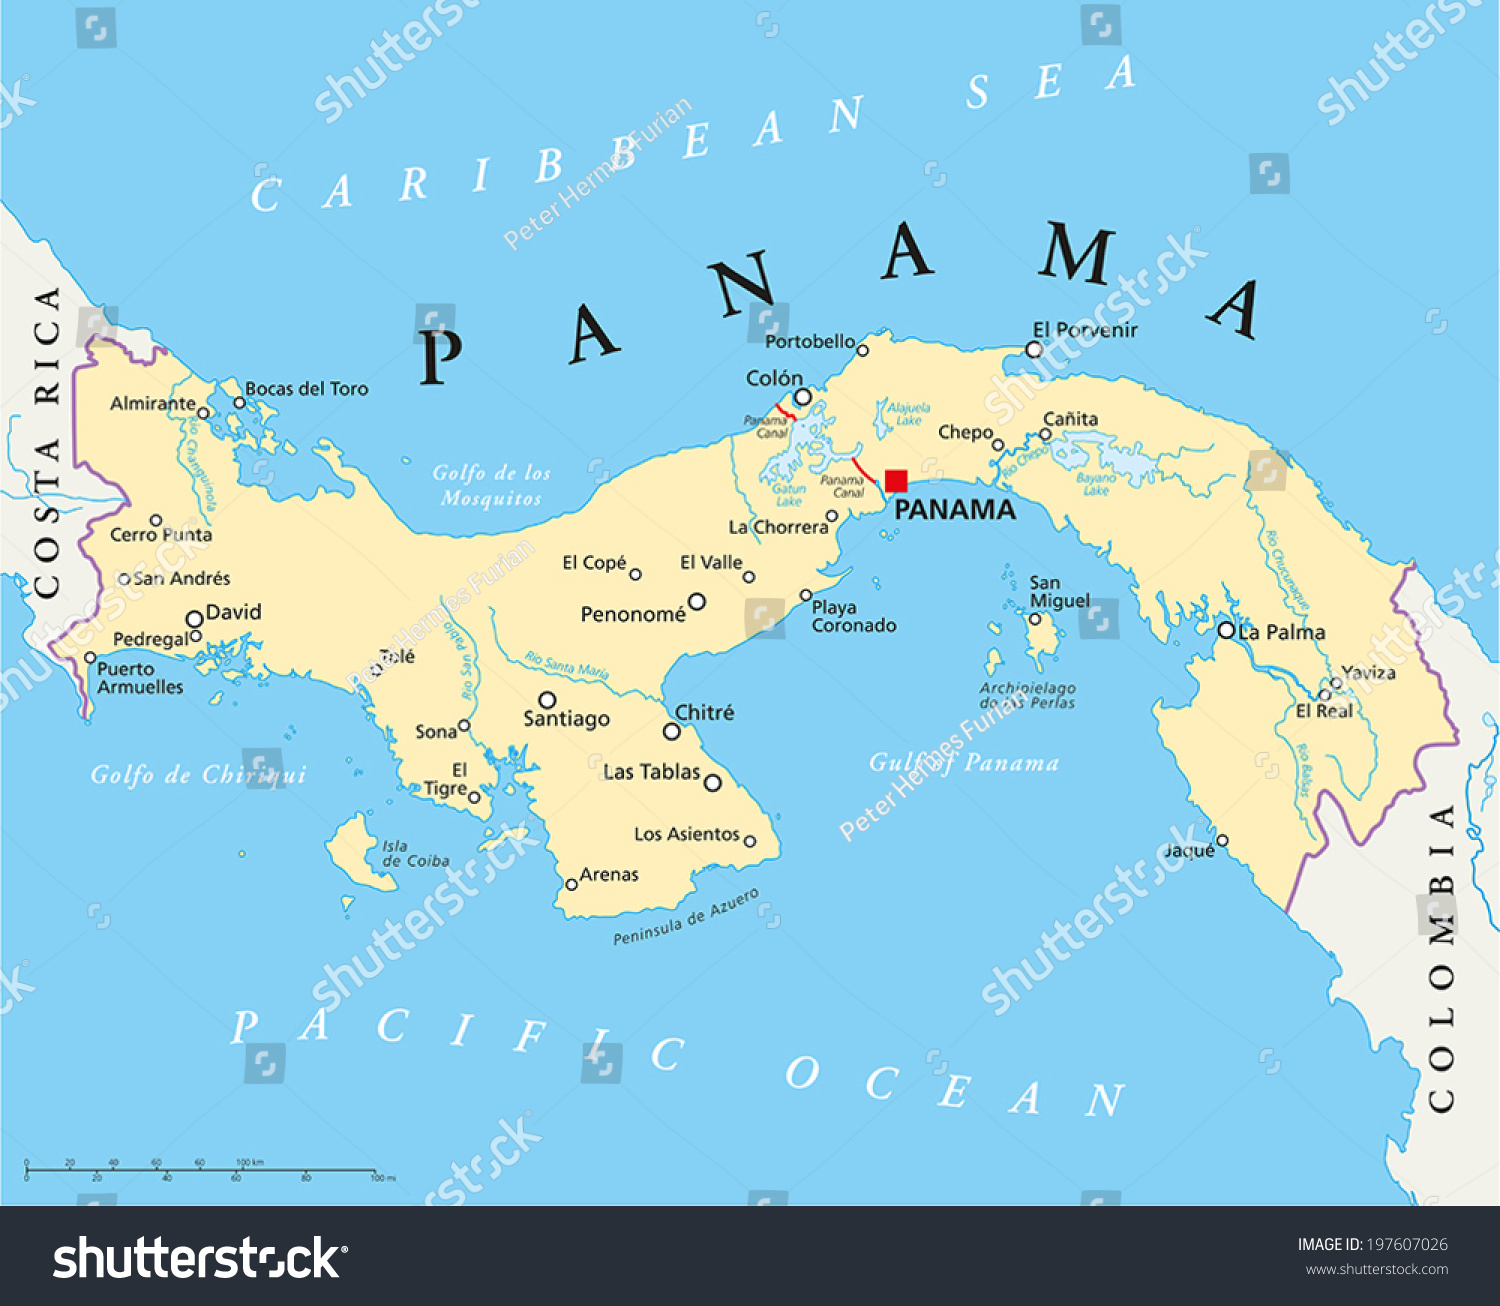 Albums 94+ Images what does panama look like on a map Excellent